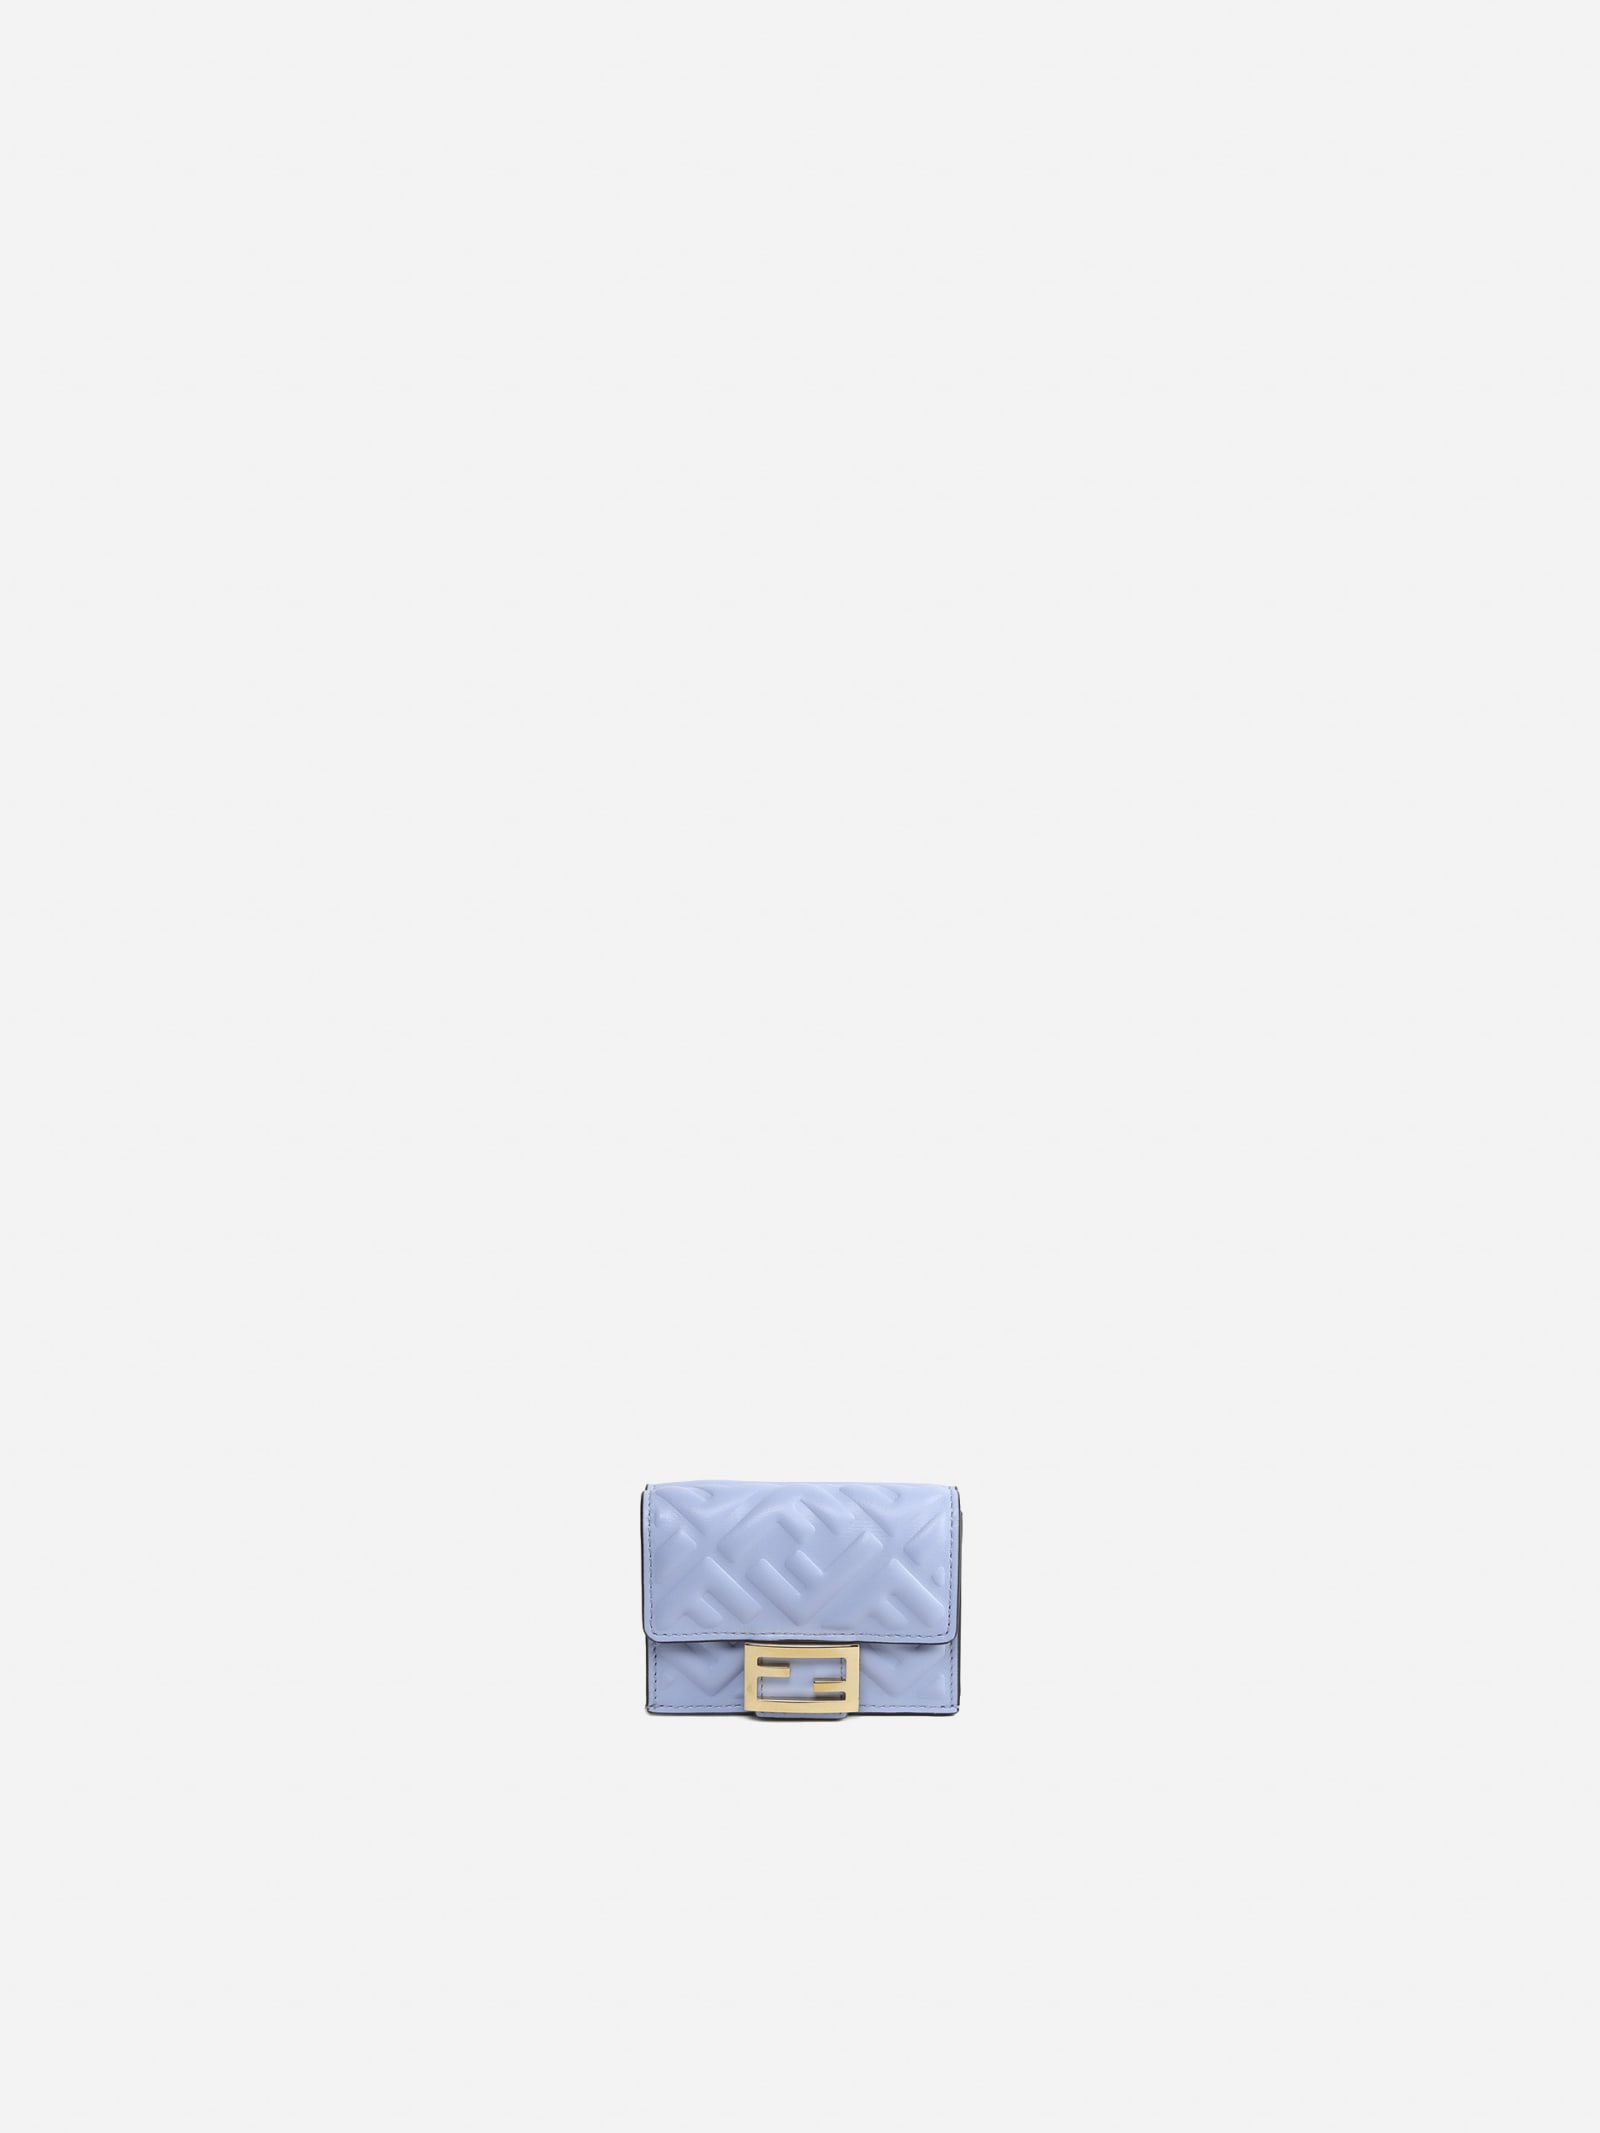 Fendi Baguette Wallet In Leather With All-over Ff Motif In Light Blue